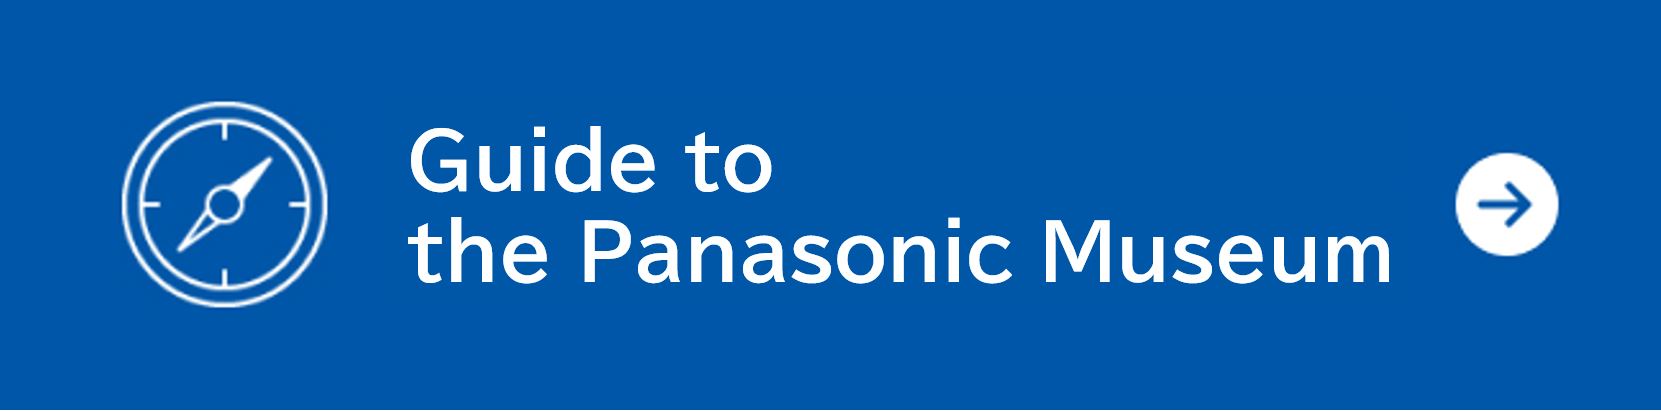 Guide to the Panasonic Museum